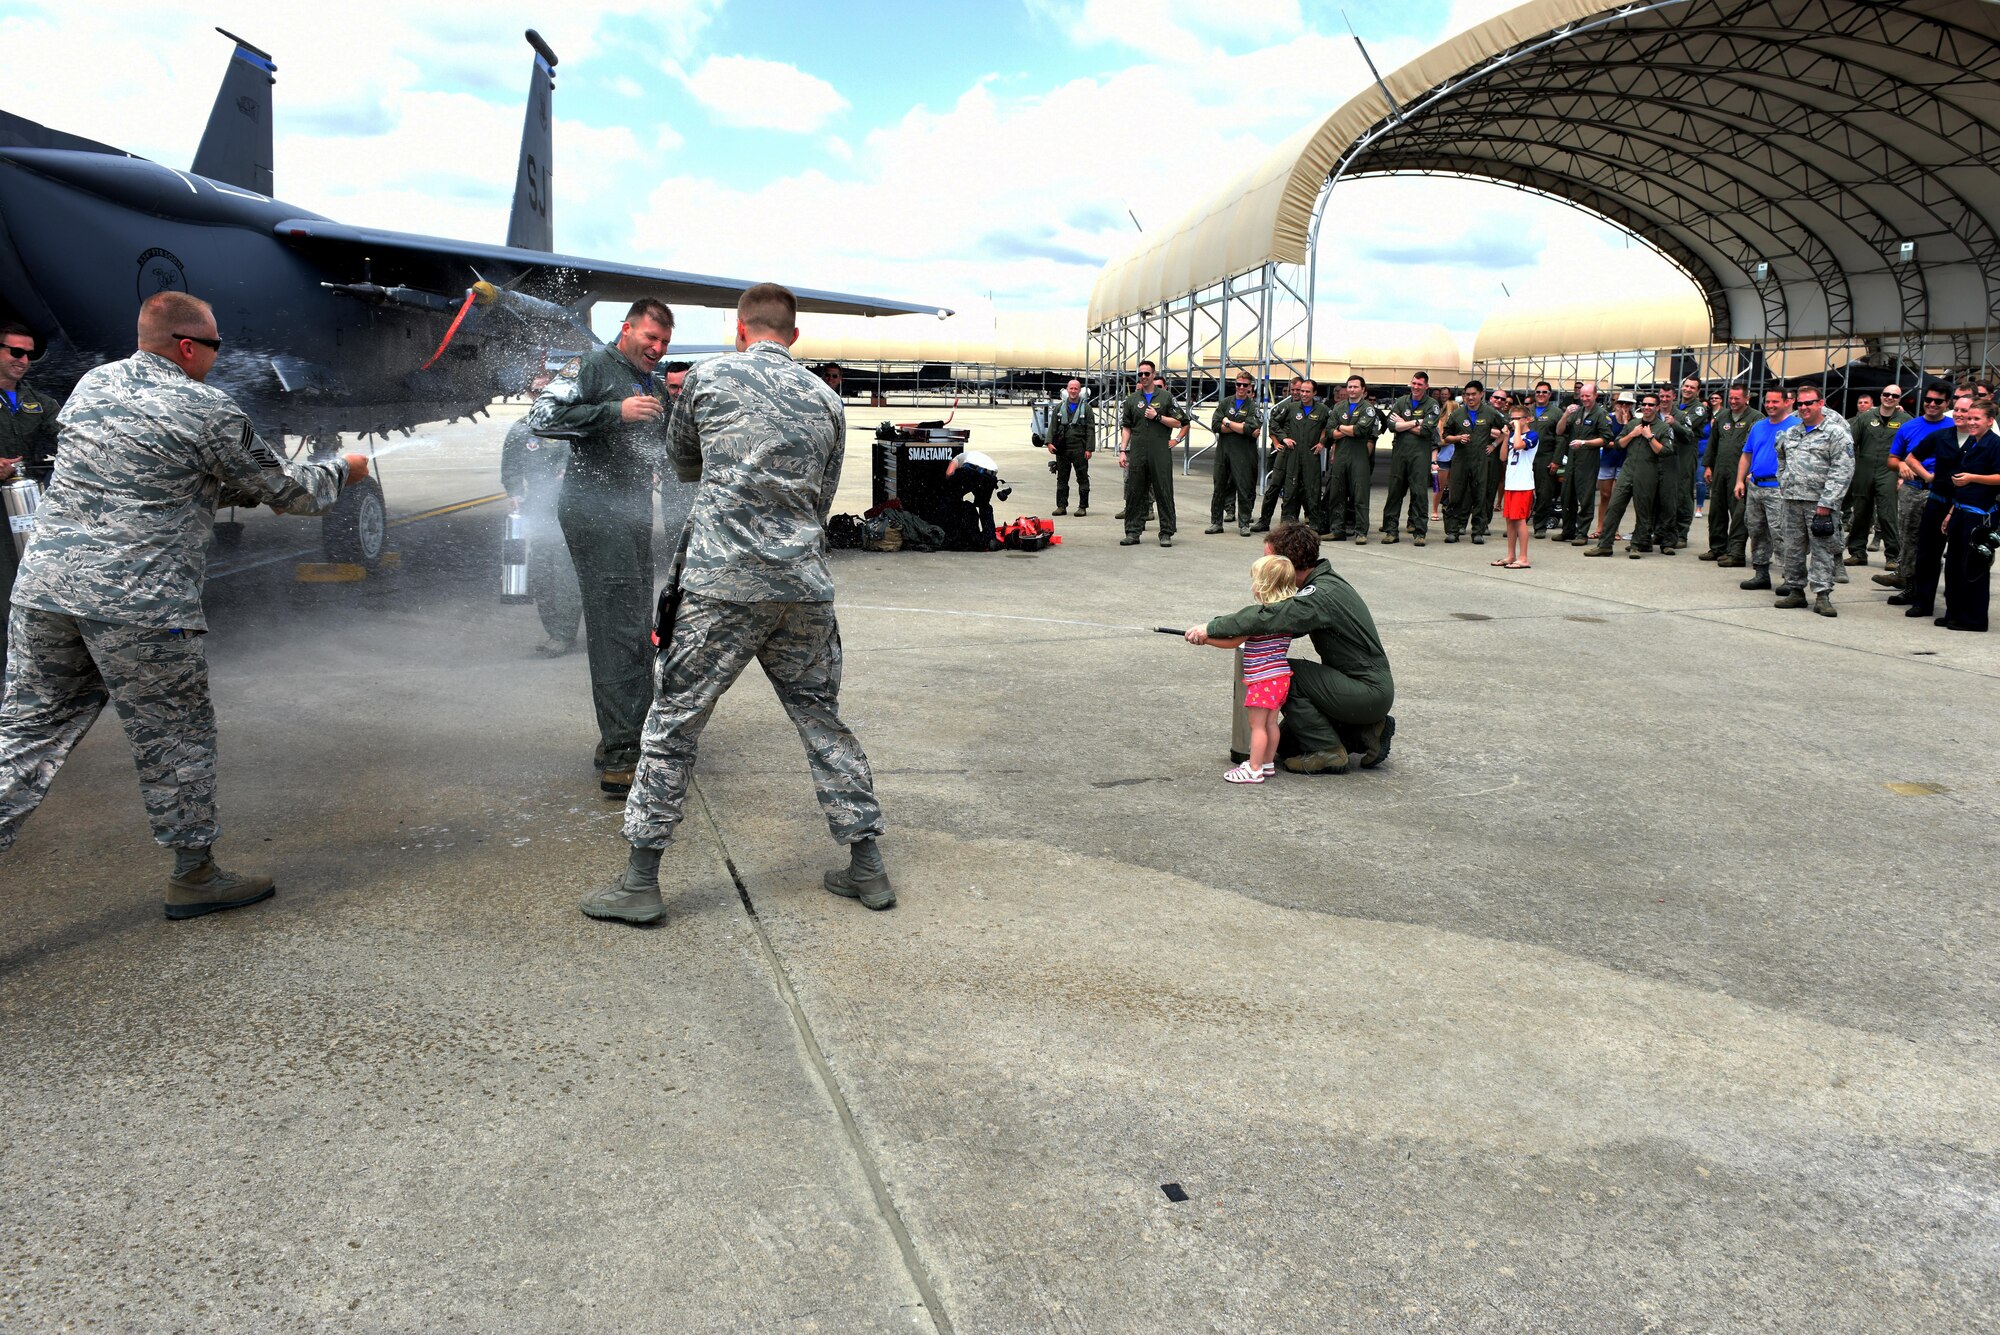 Lt. Col. Eric Schmidt, 334th Fighter Squadron director of operations is sprayed down by friends and family members following his final F-15E Strike Eagle flight June 17, 2016, at Seymour Johnson Air Force Base, North Carolina. Schmidt eclipsed 3,000 hours in the Strike Eagle and was greeted by many to celebrate the occasion. (U.S. Air Force photo/Tech. Sgt. Chuck Broadway)